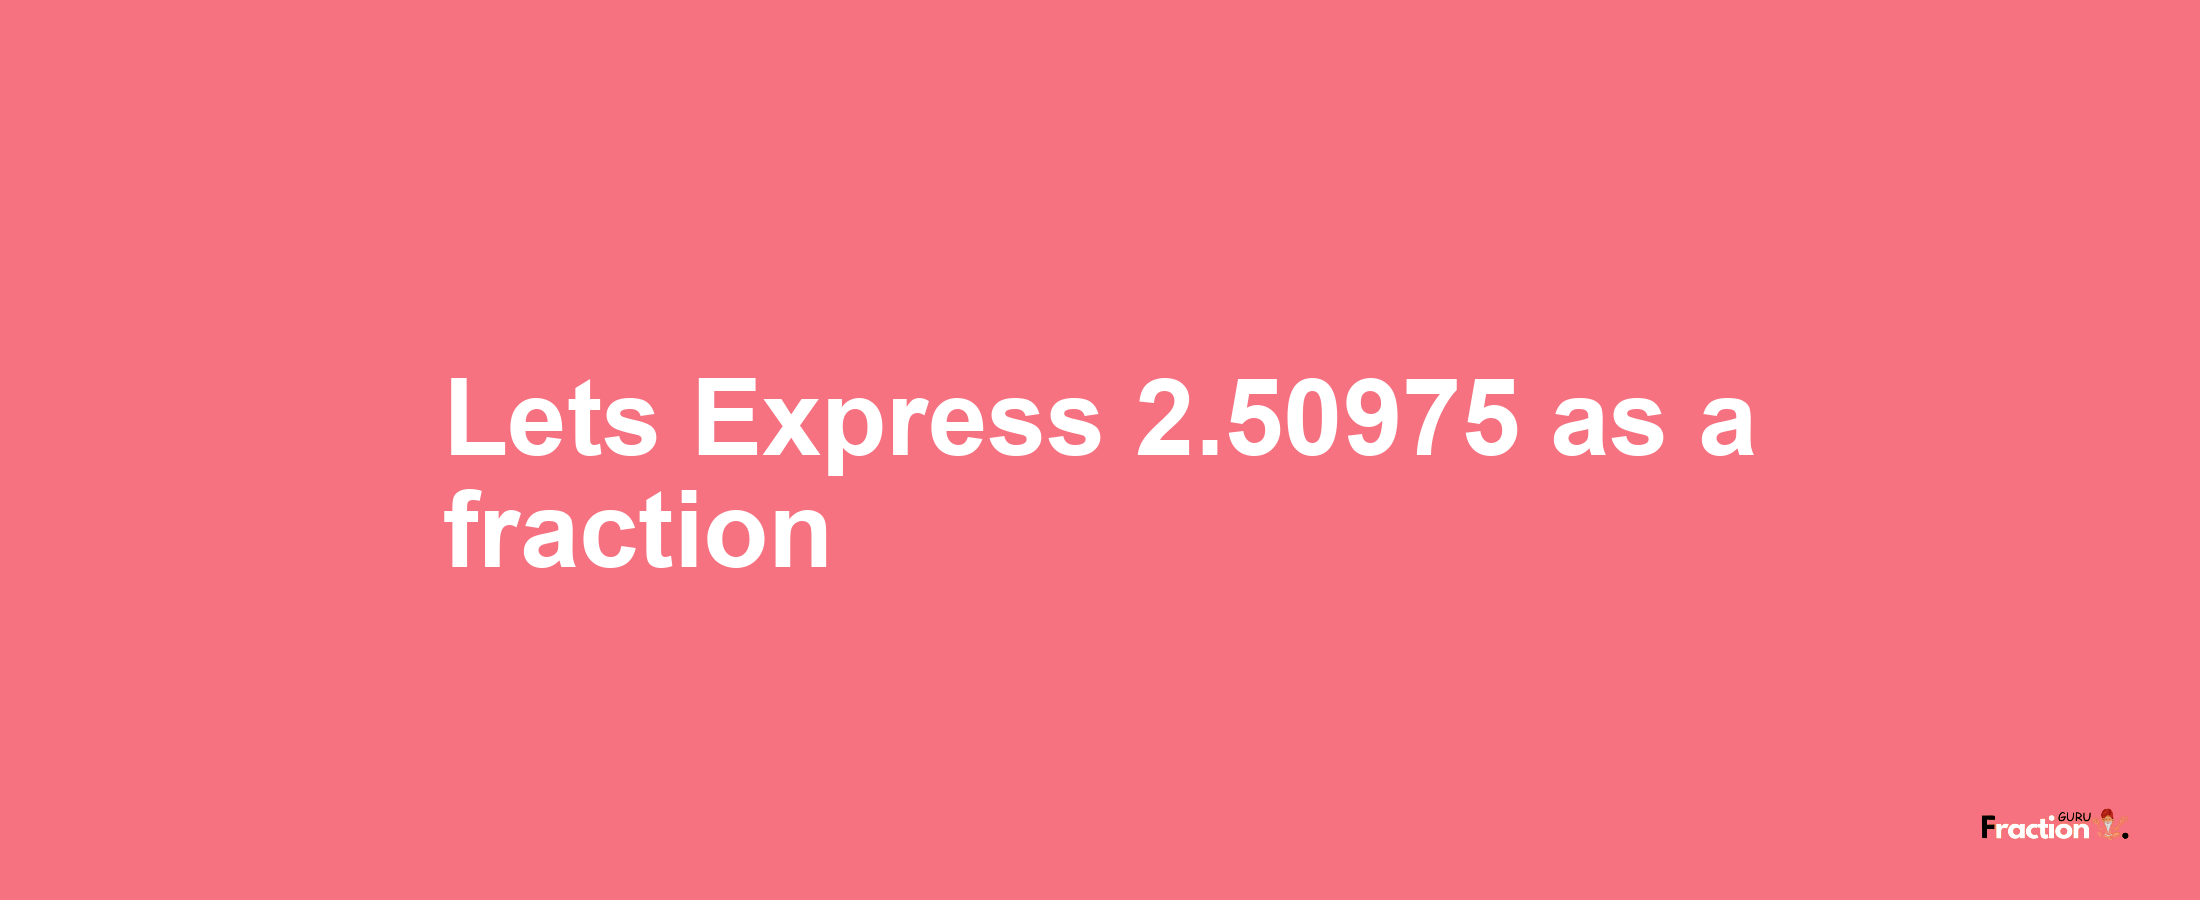 Lets Express 2.50975 as afraction